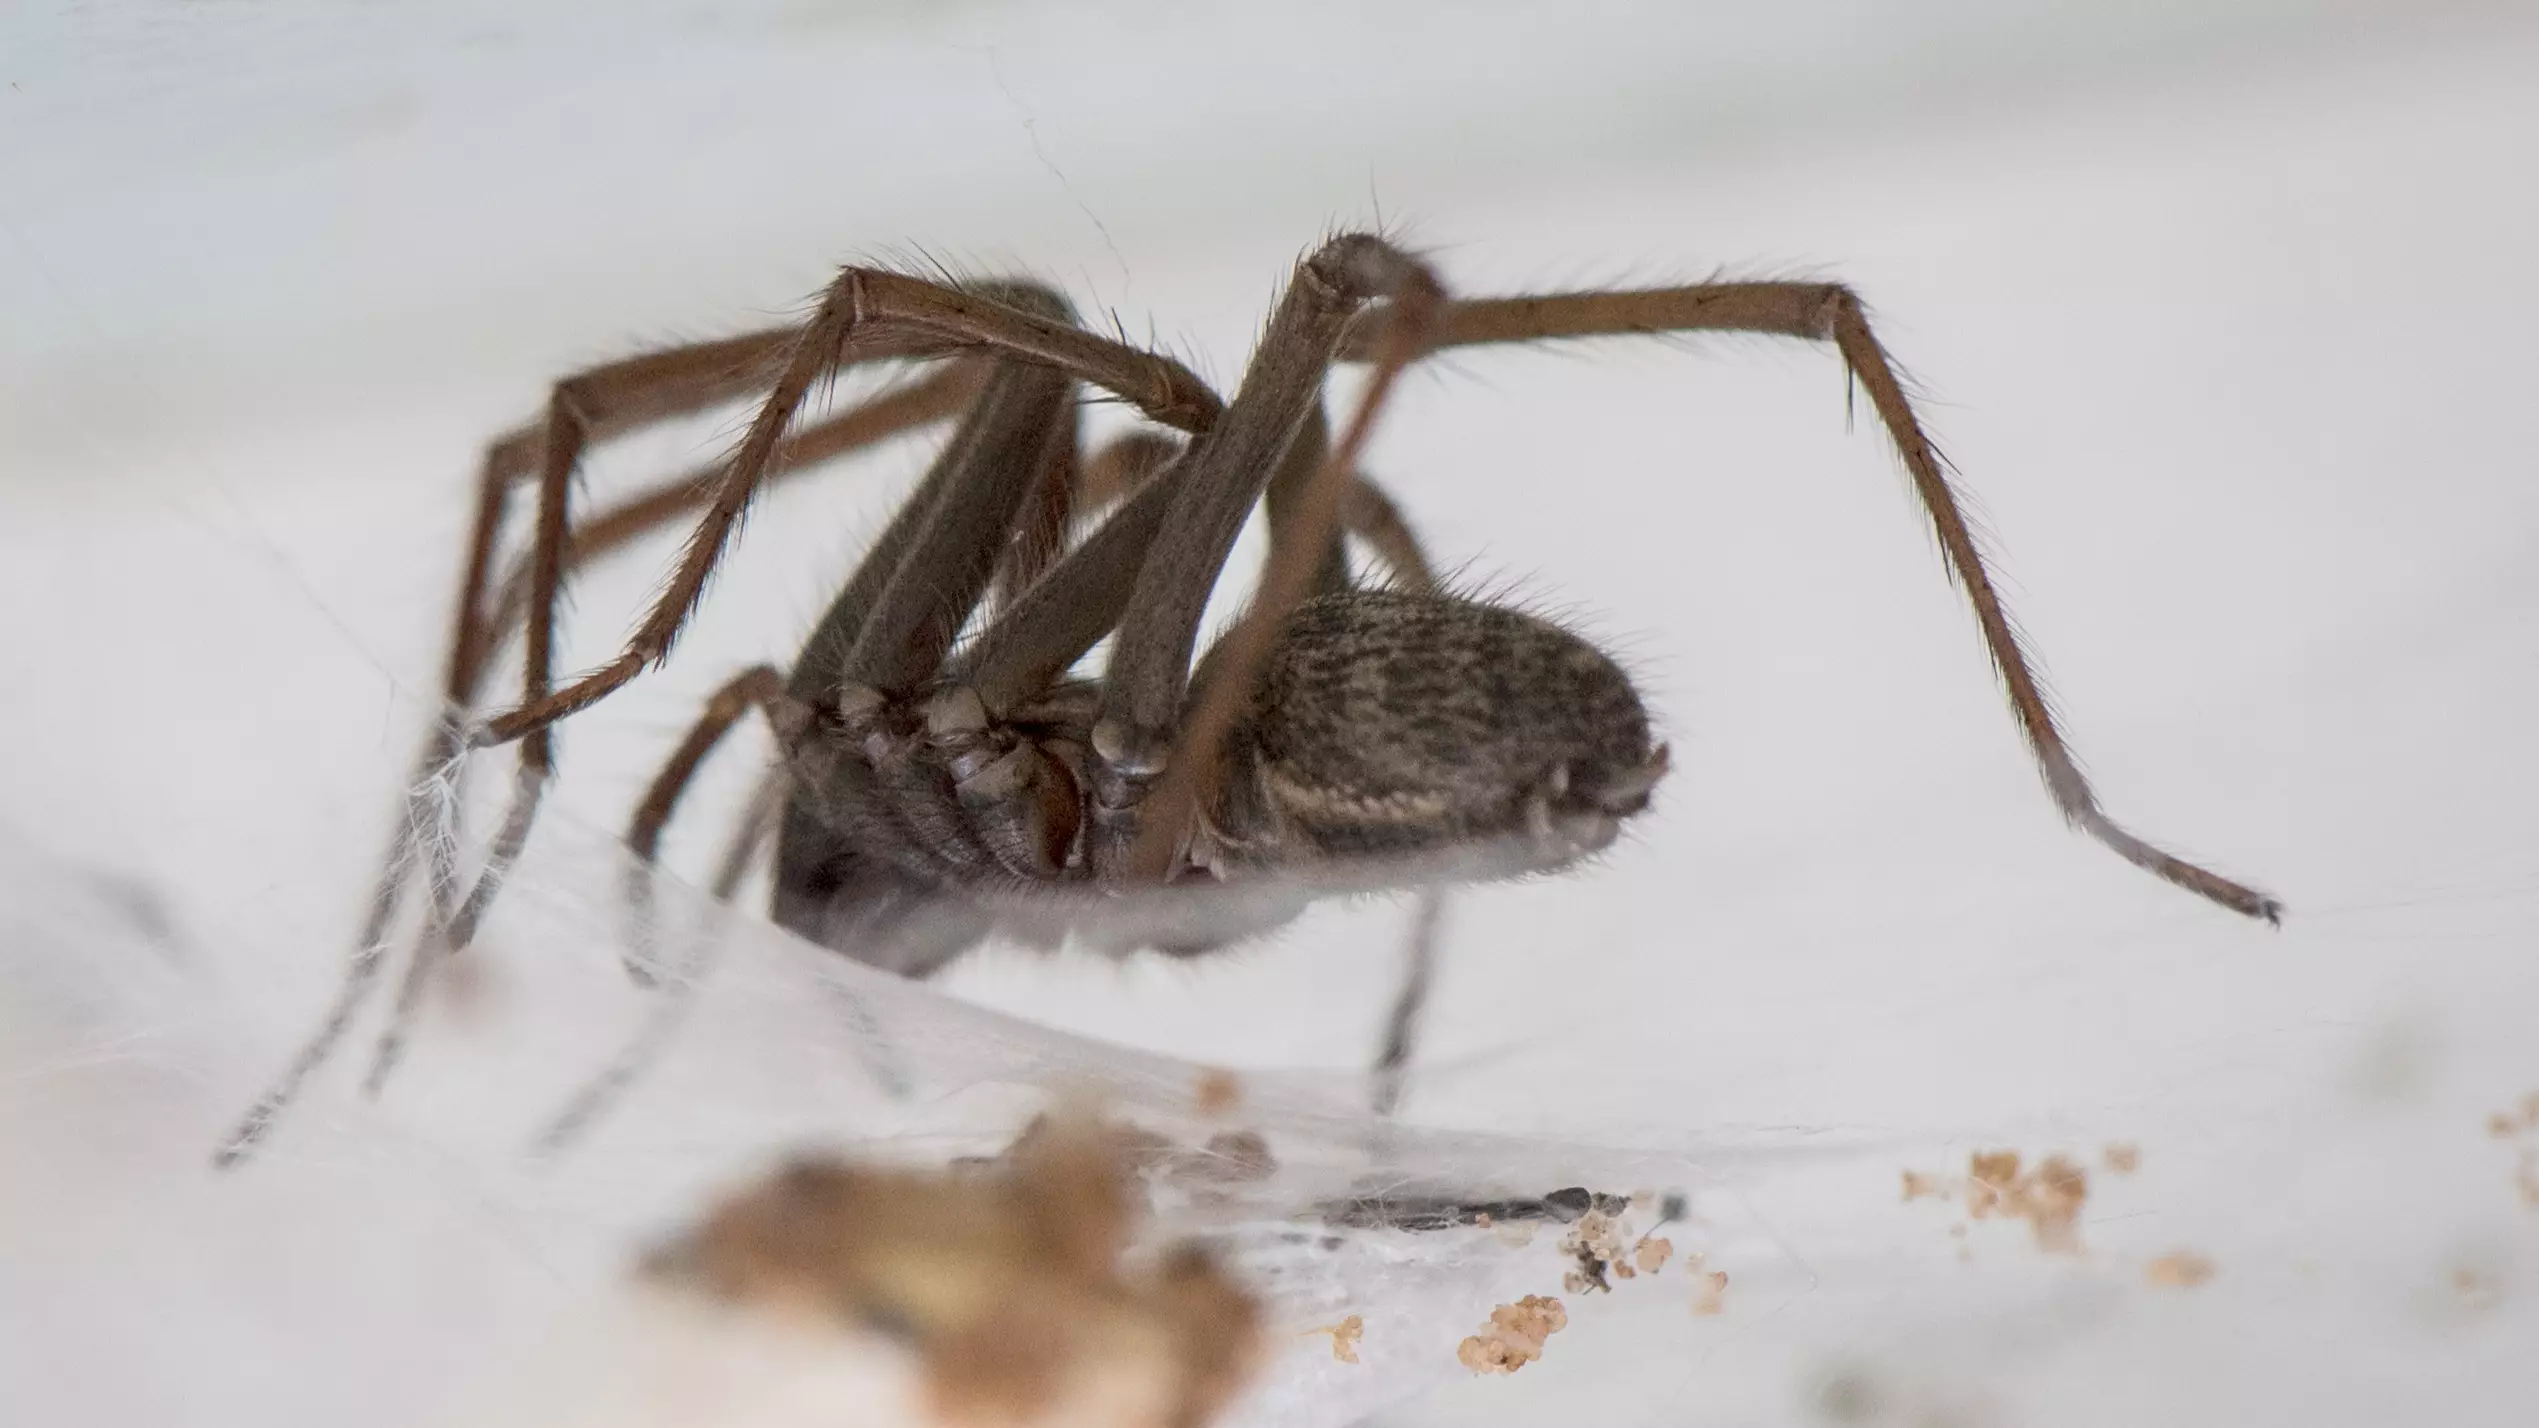 Warm Wet Summer Means We're Seeing More Spiders In Our Houses